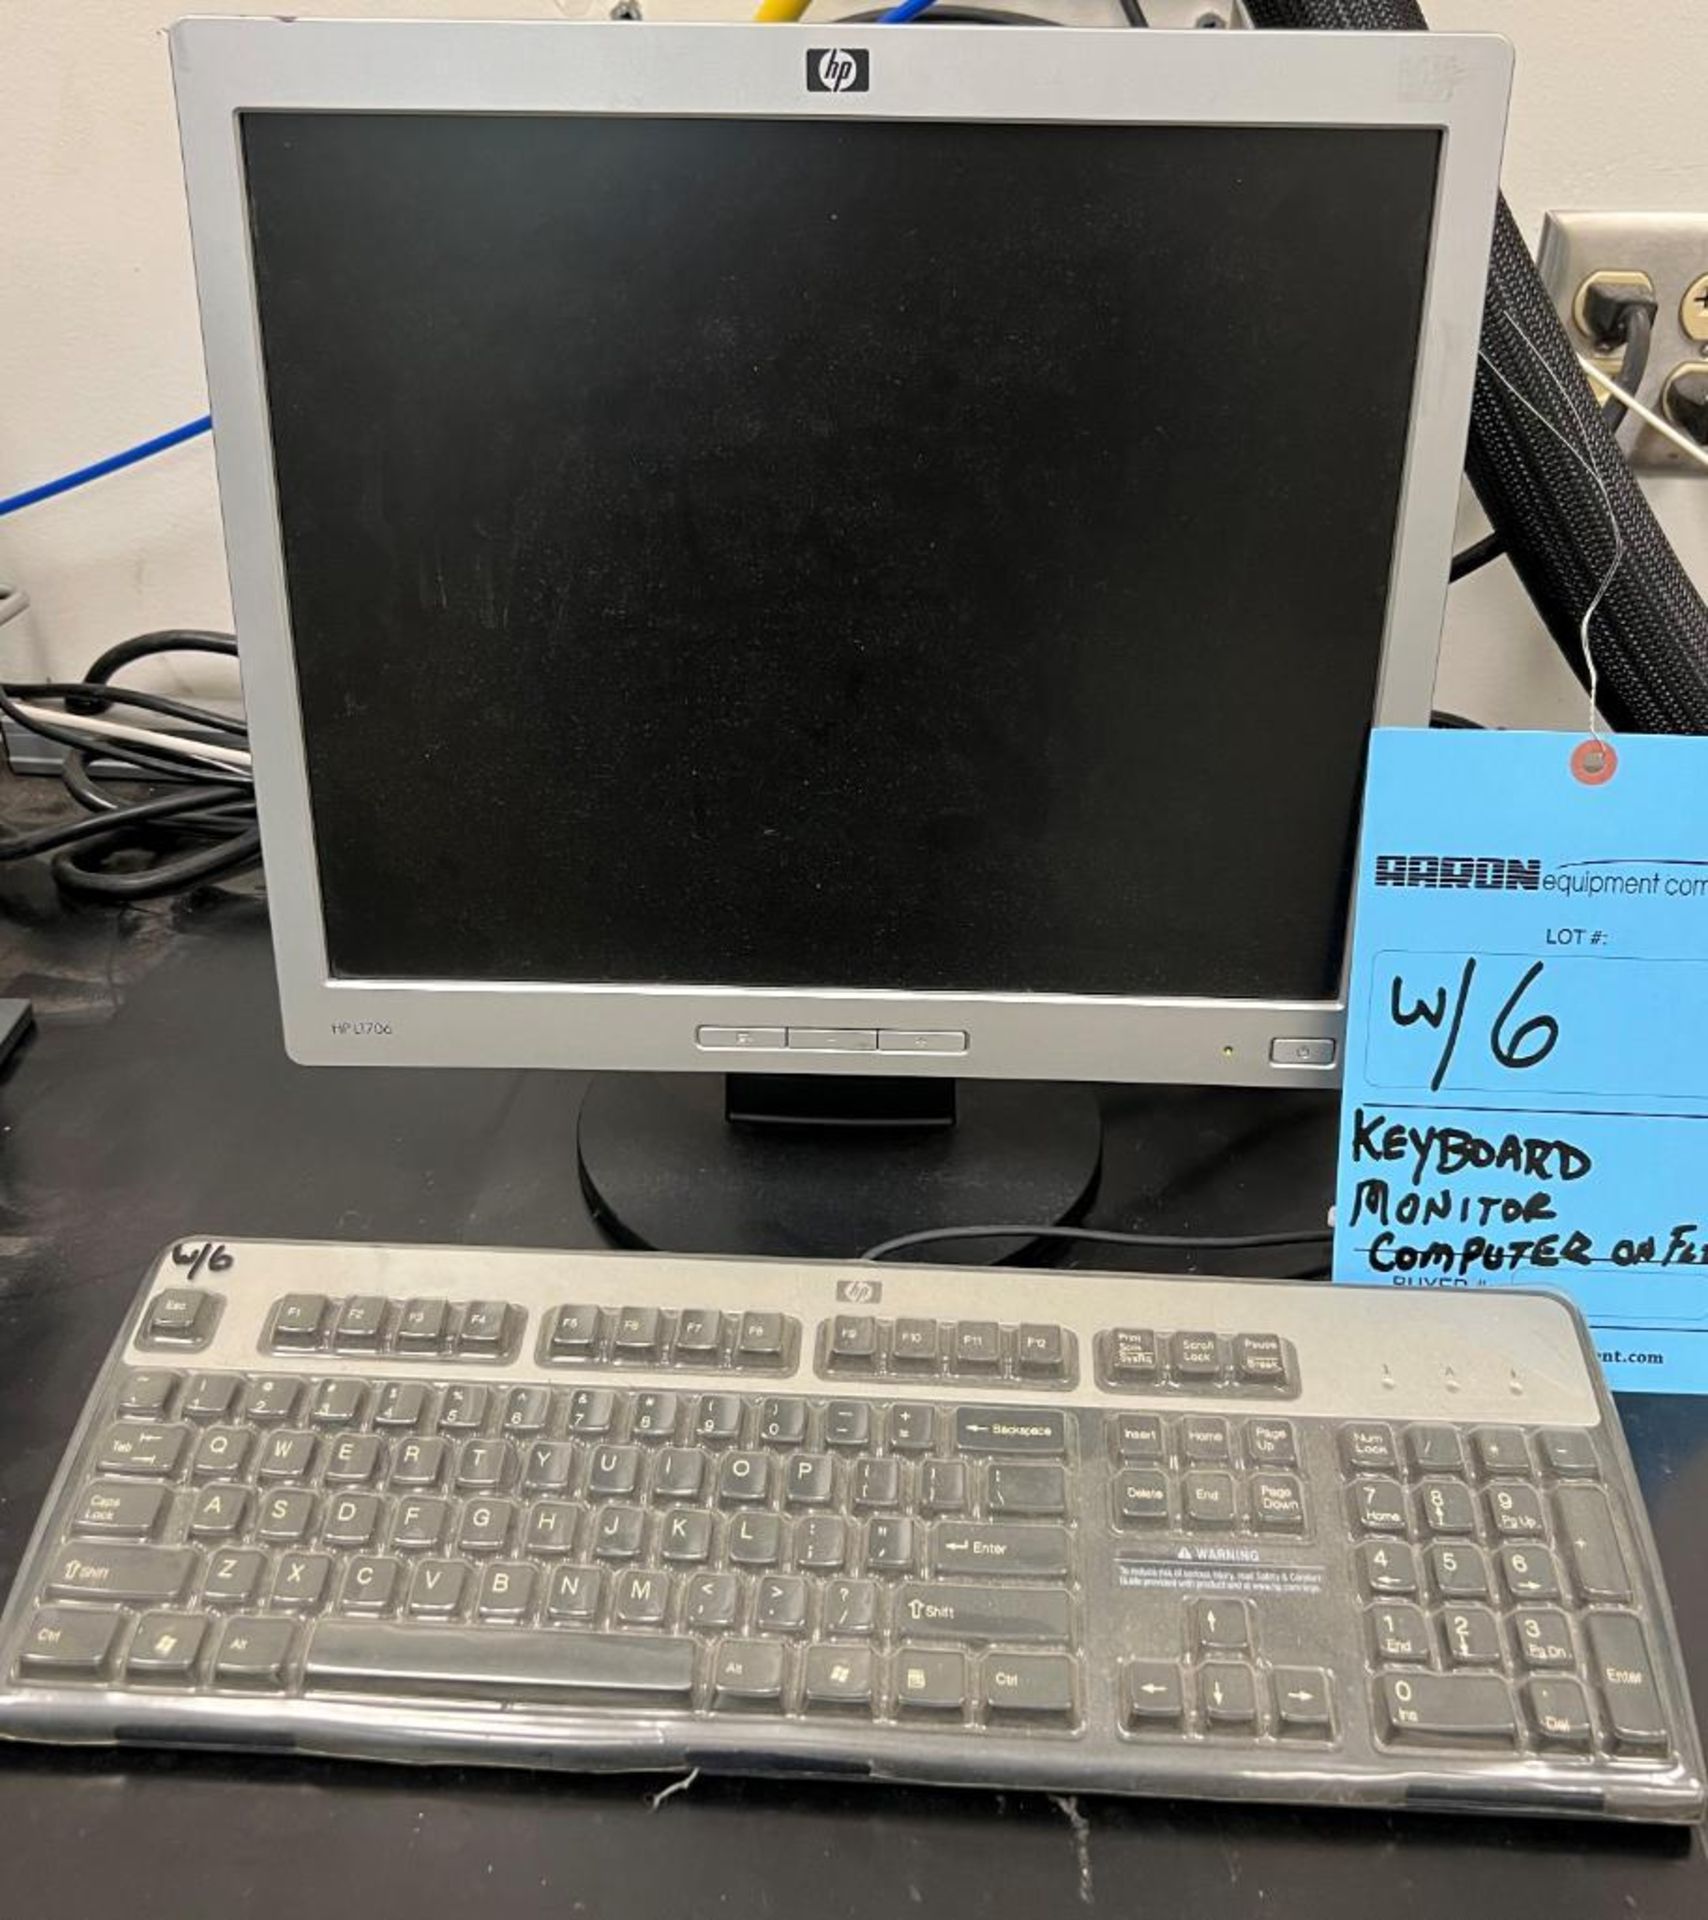 HP xw4400 Computer with monitor & keyboard. Last used with LOT# 3, 4, 5.